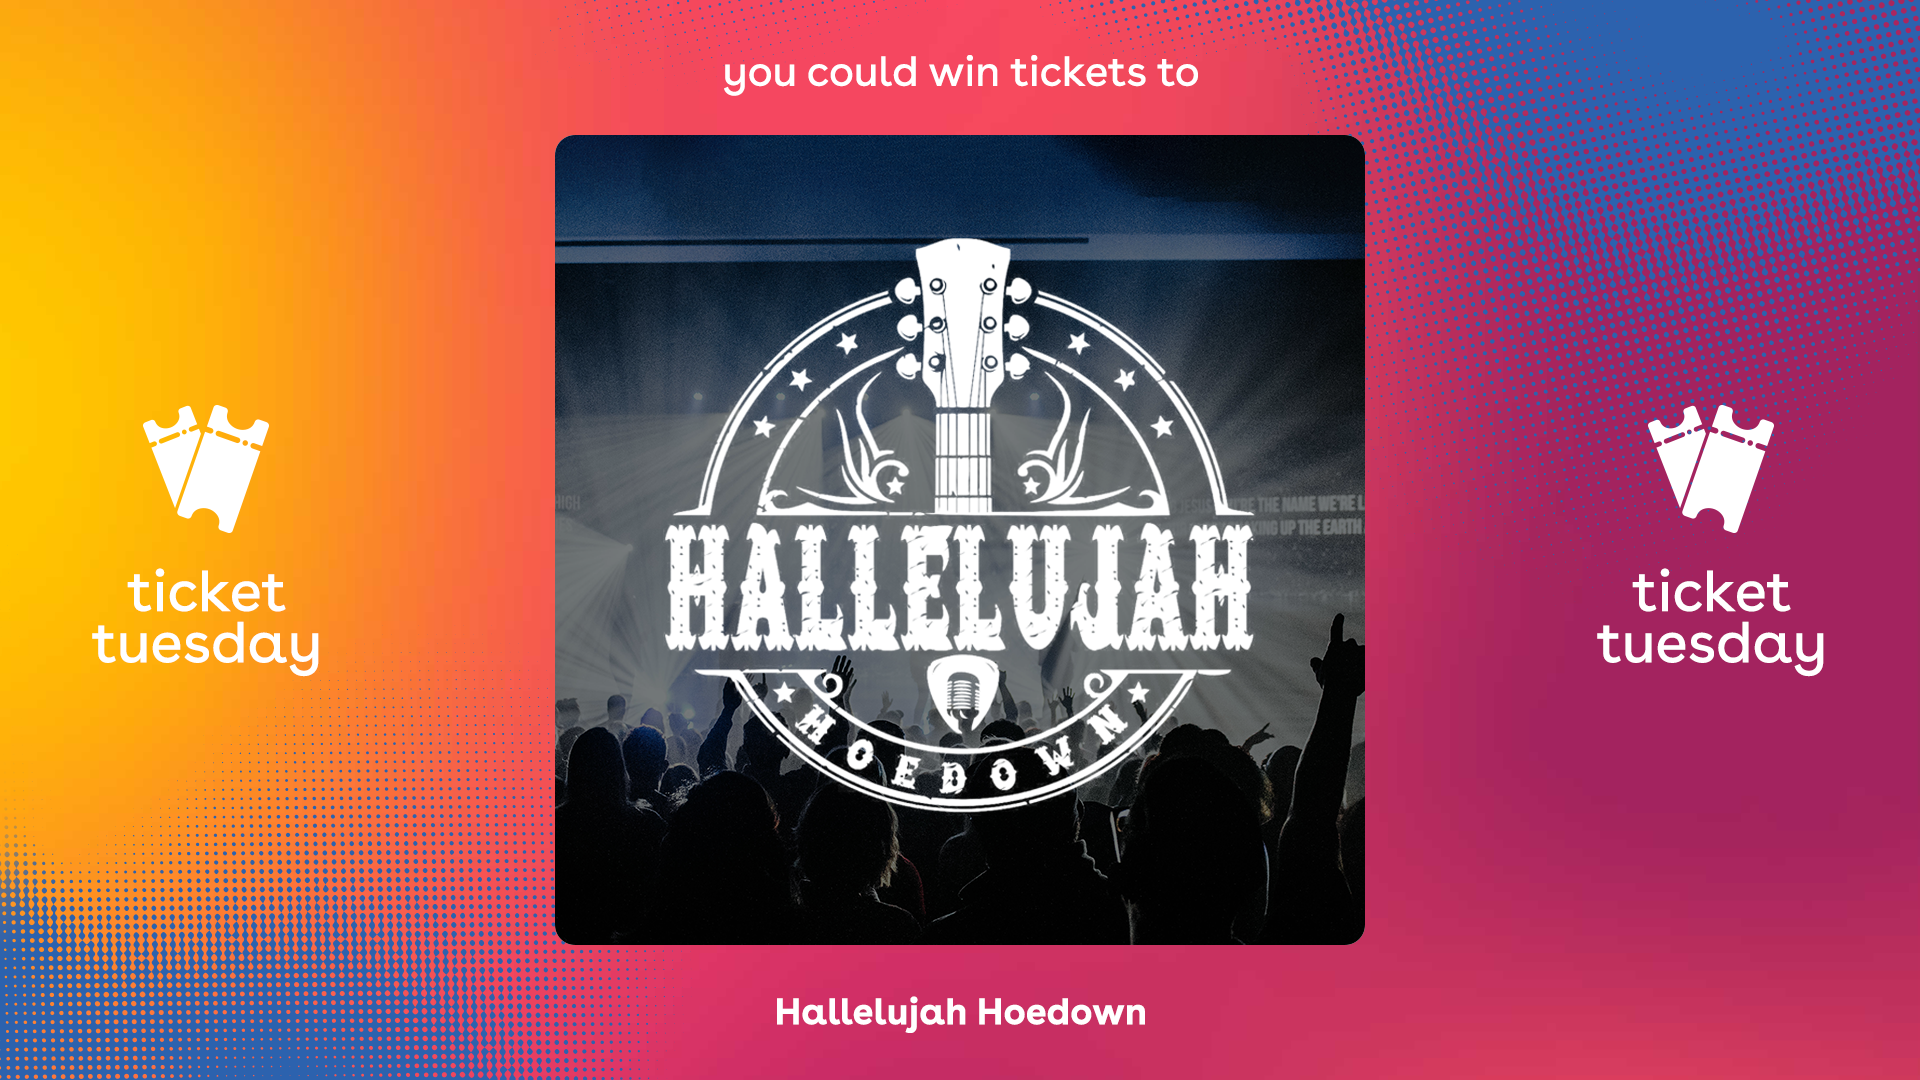 Hallelujah Hoedown Ticket Tuesday contest on June 6th